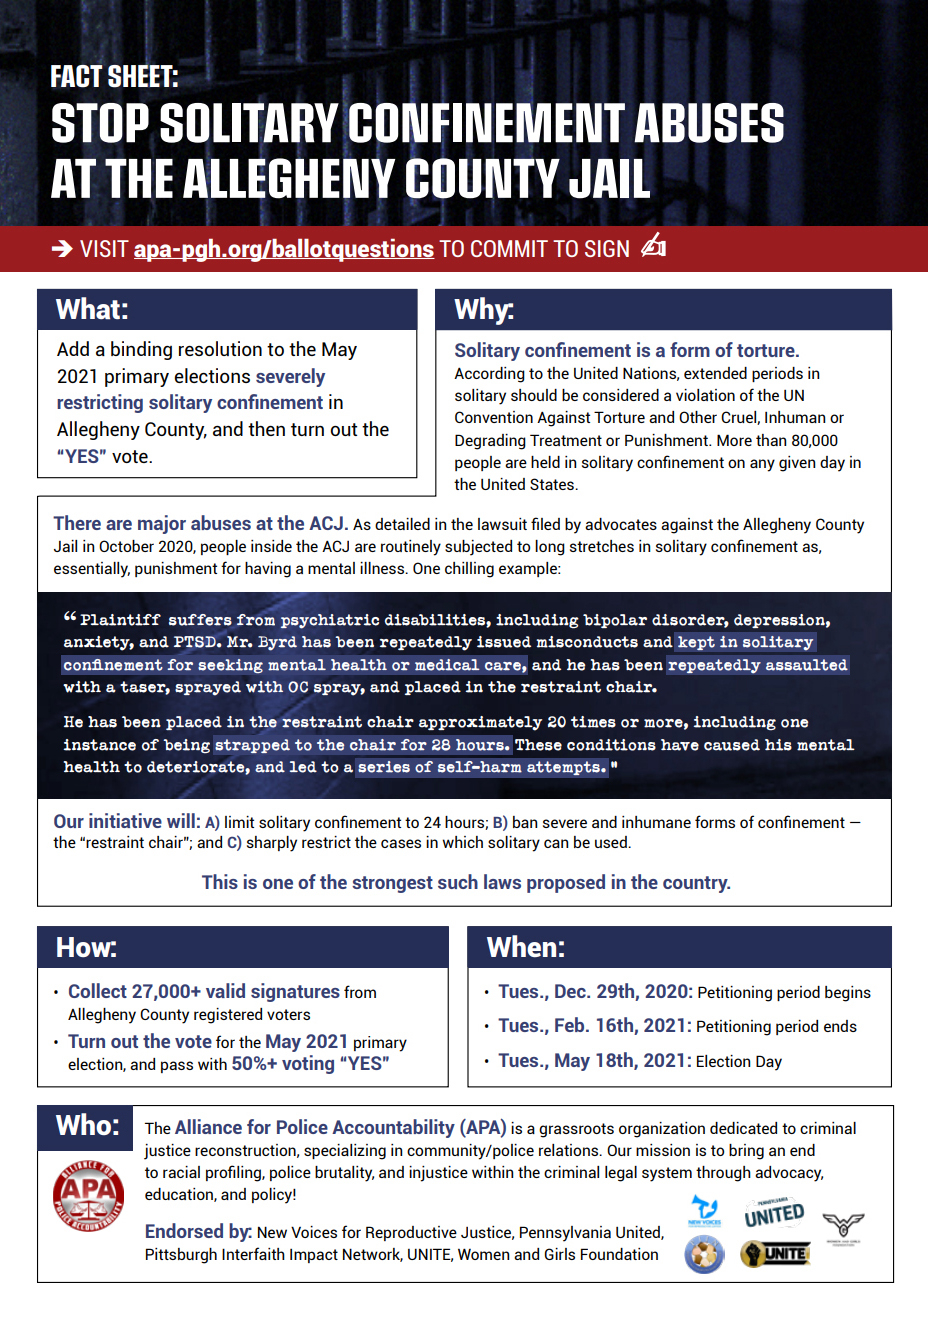 Fact sheet for the campaign to stop solitary confinement.